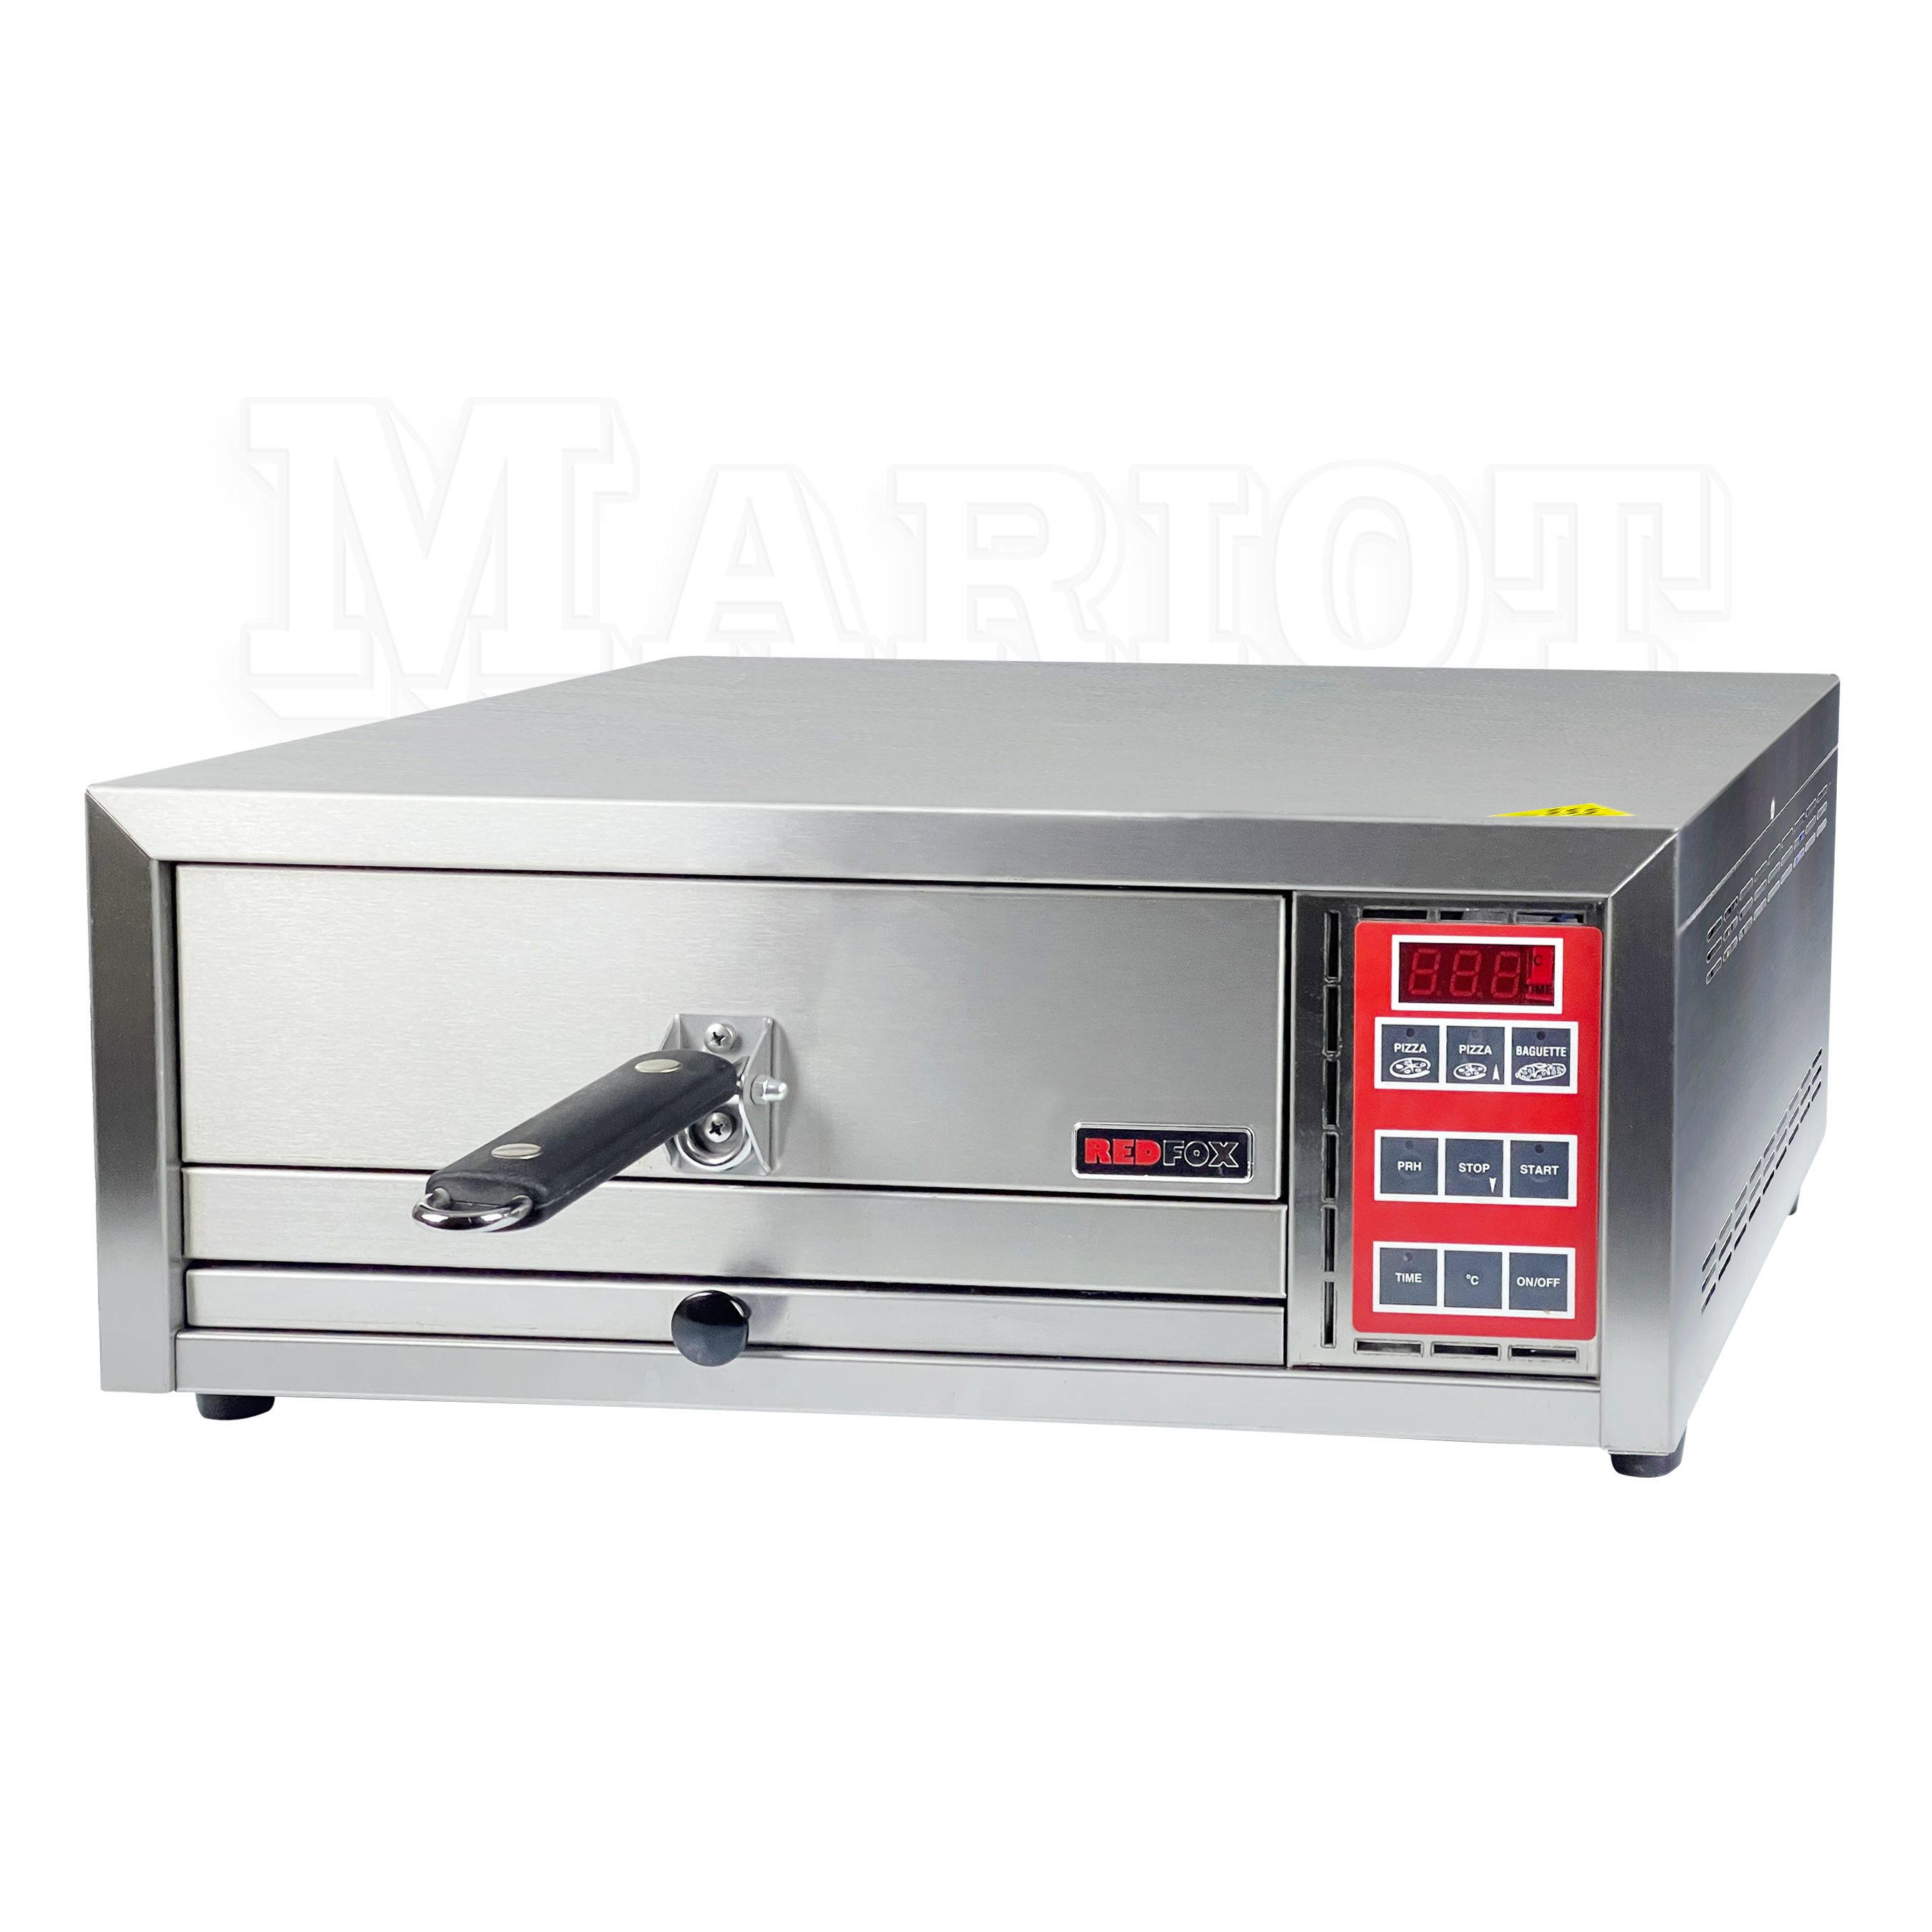 ELECTRIC SNACK OVEN - DIGITAL CONTROL FPP 36